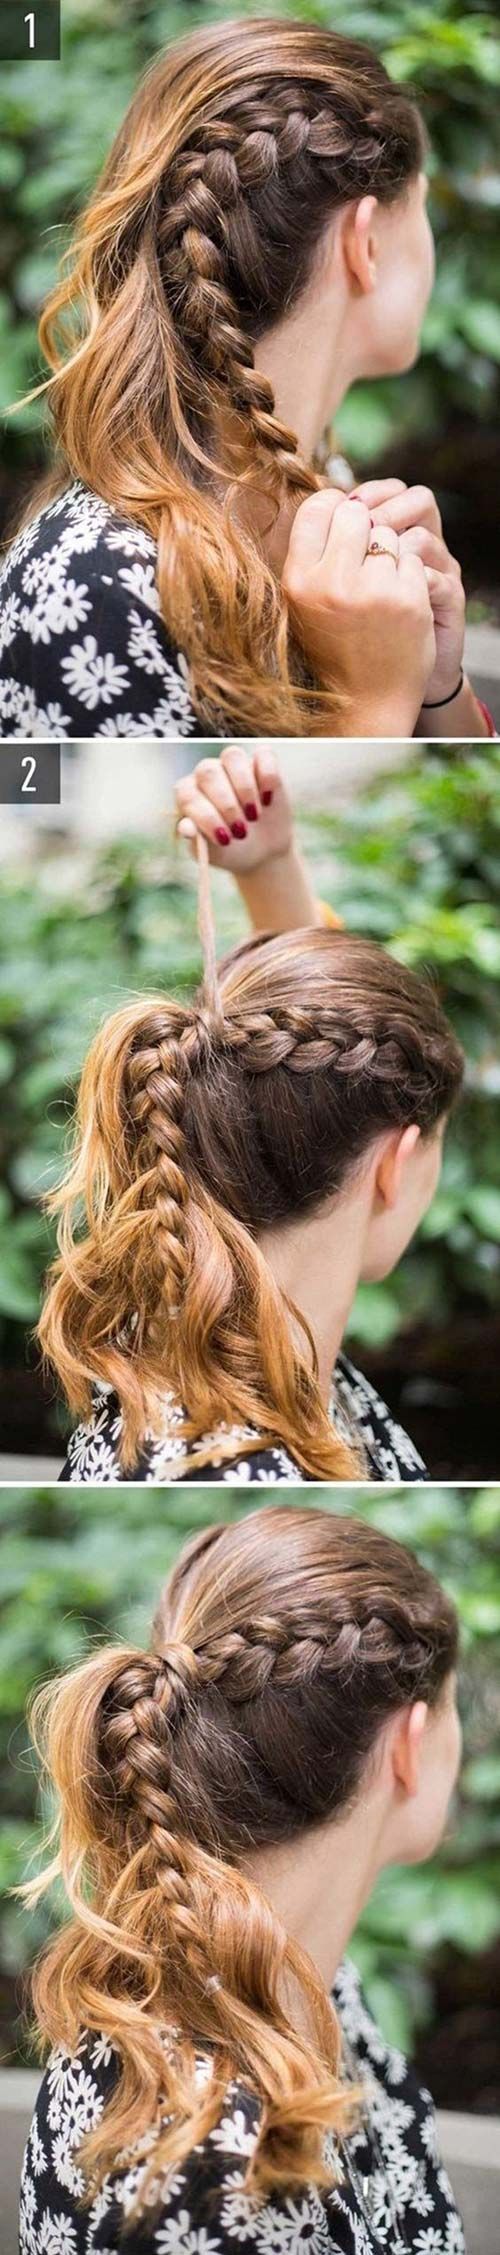 1576264430_112_20-Awesome-Hairstyles-For-Girls-With-Long-Hair.jpg